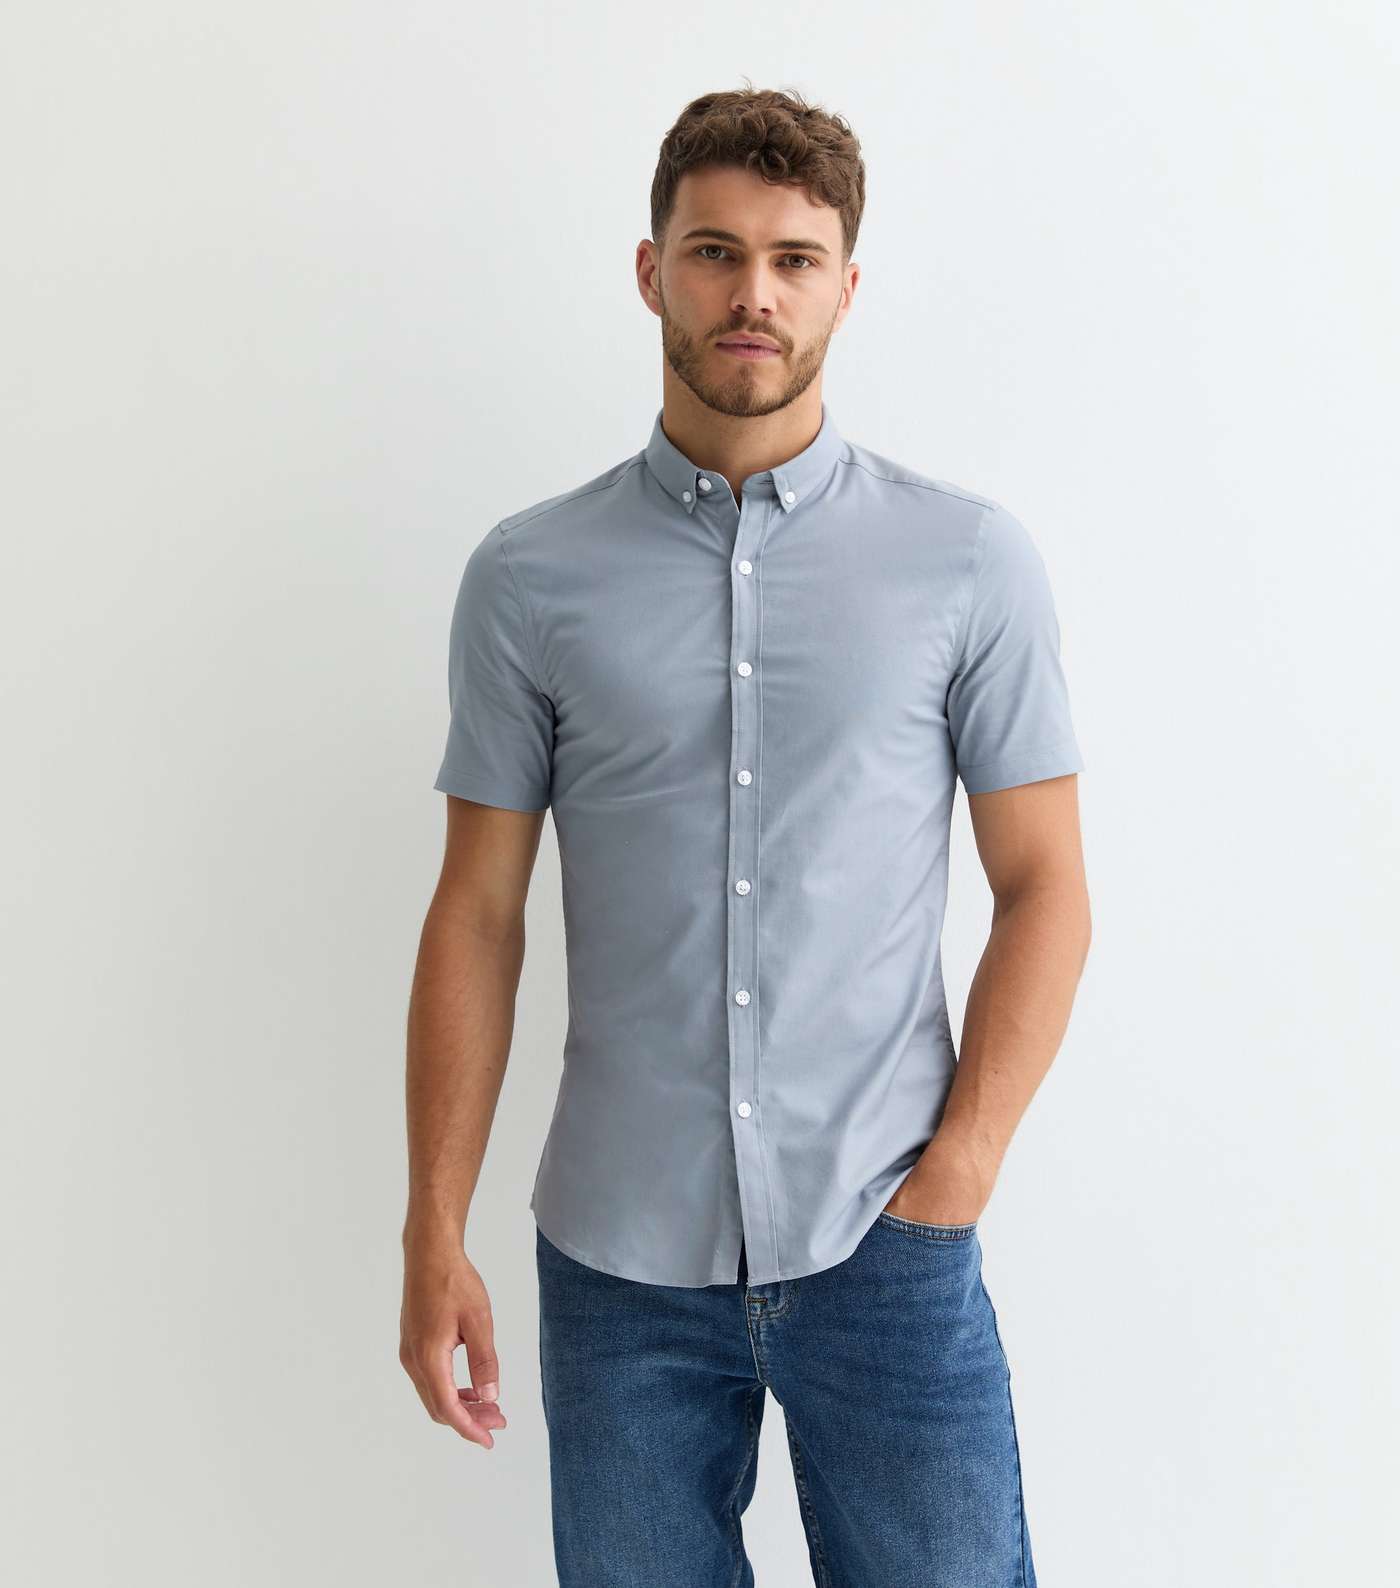 Pale Grey Short Sleeve Muscle Fit Oxford Shirt Image 2